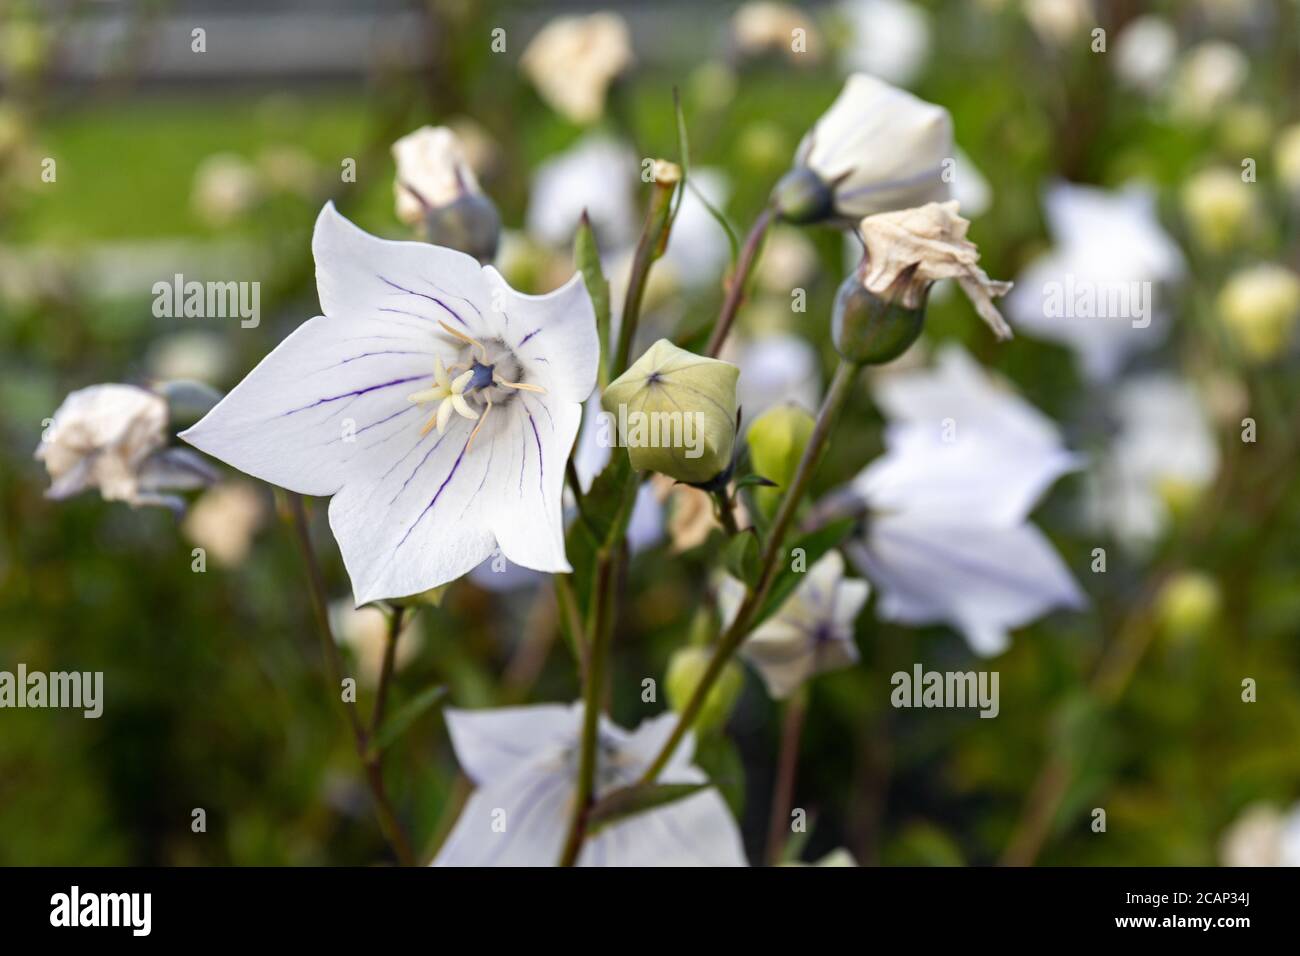 Closeup of Platycodon grandiflorus white flower with purple veins. It is commonly known as balloon flower, Chinese bellflower or platycodon. Stock Photo